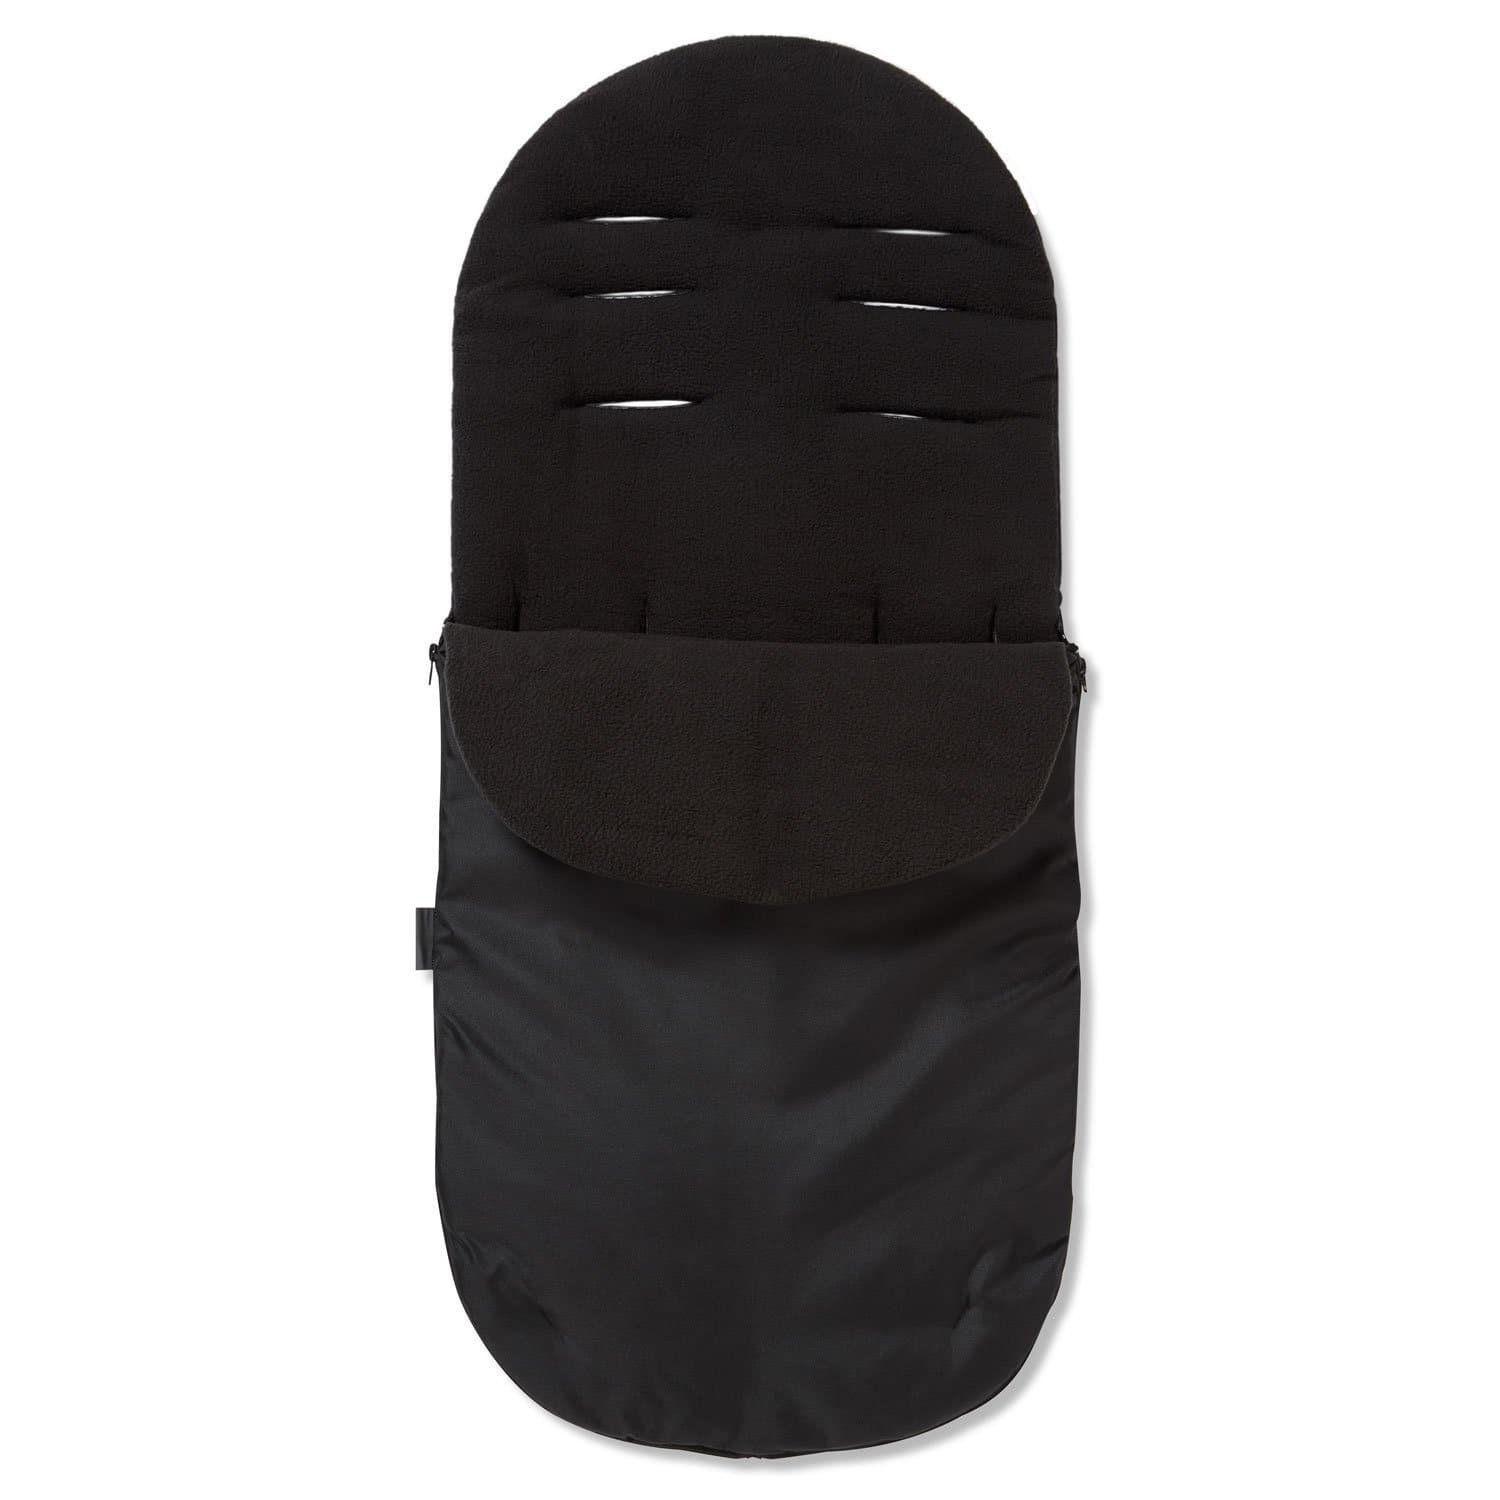 Footmuff / Cosy Toes Compatible with Tippitoes - Black / Fits All Models | For Your Little One